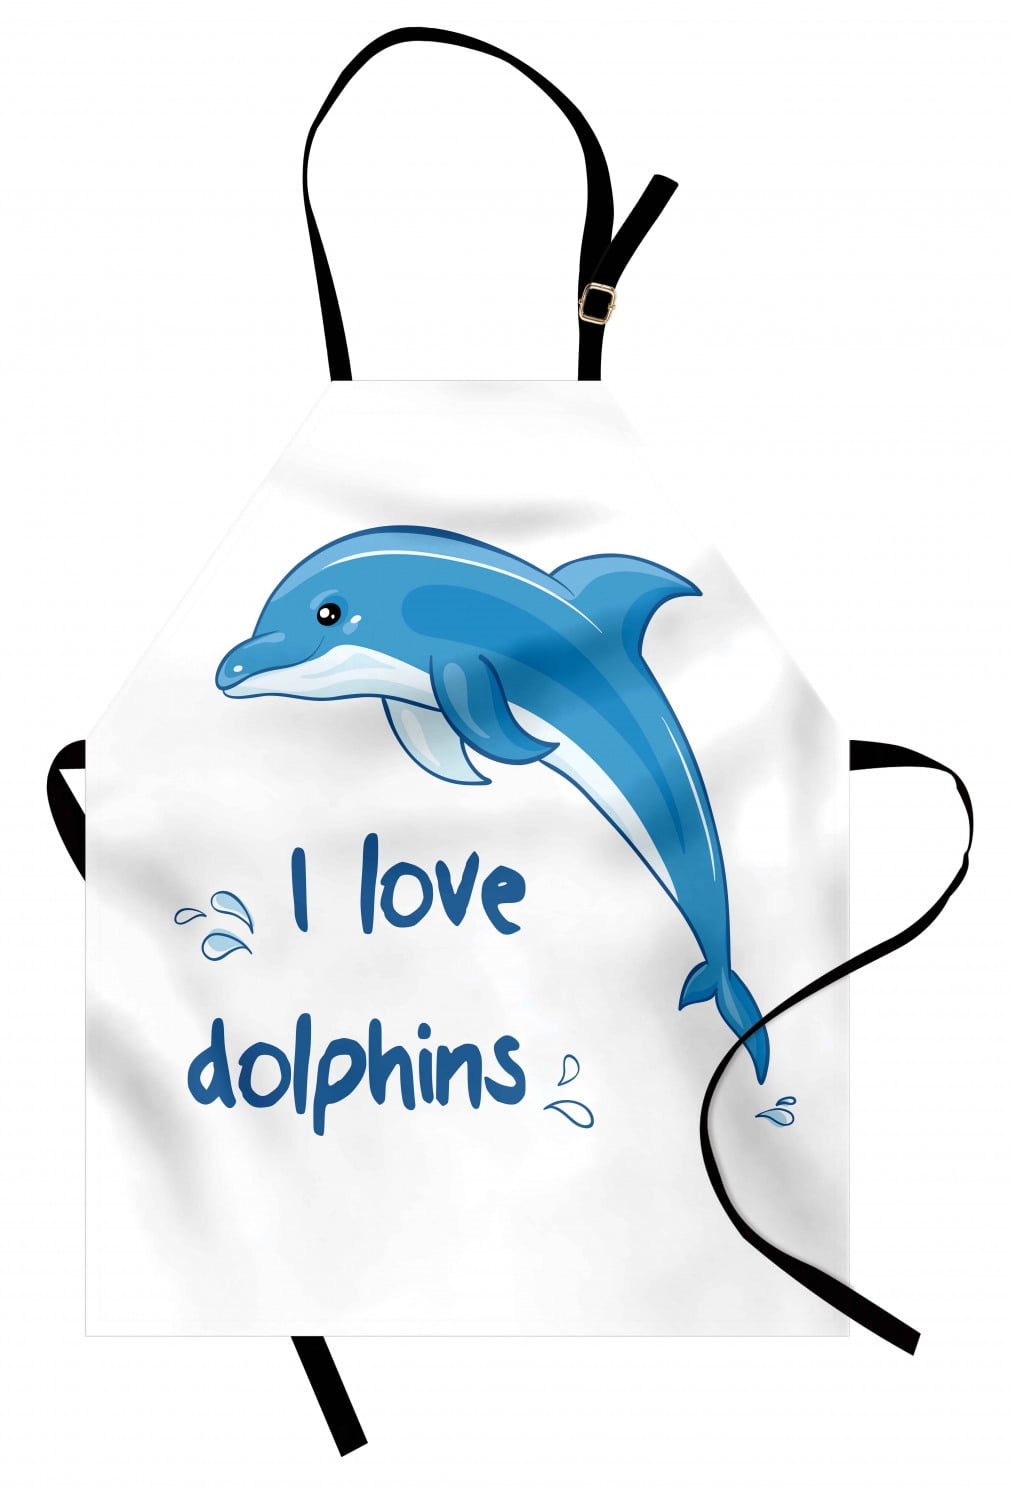 Dolphin Apron Cartoon Style Ocean Animal with I Love Dolphins Quote and  Water Splashes Image, Unisex Kitchen Bib Apron with Adjustable Neck for  Cooking Baking Gardening, Blue White, by Ambesonne 